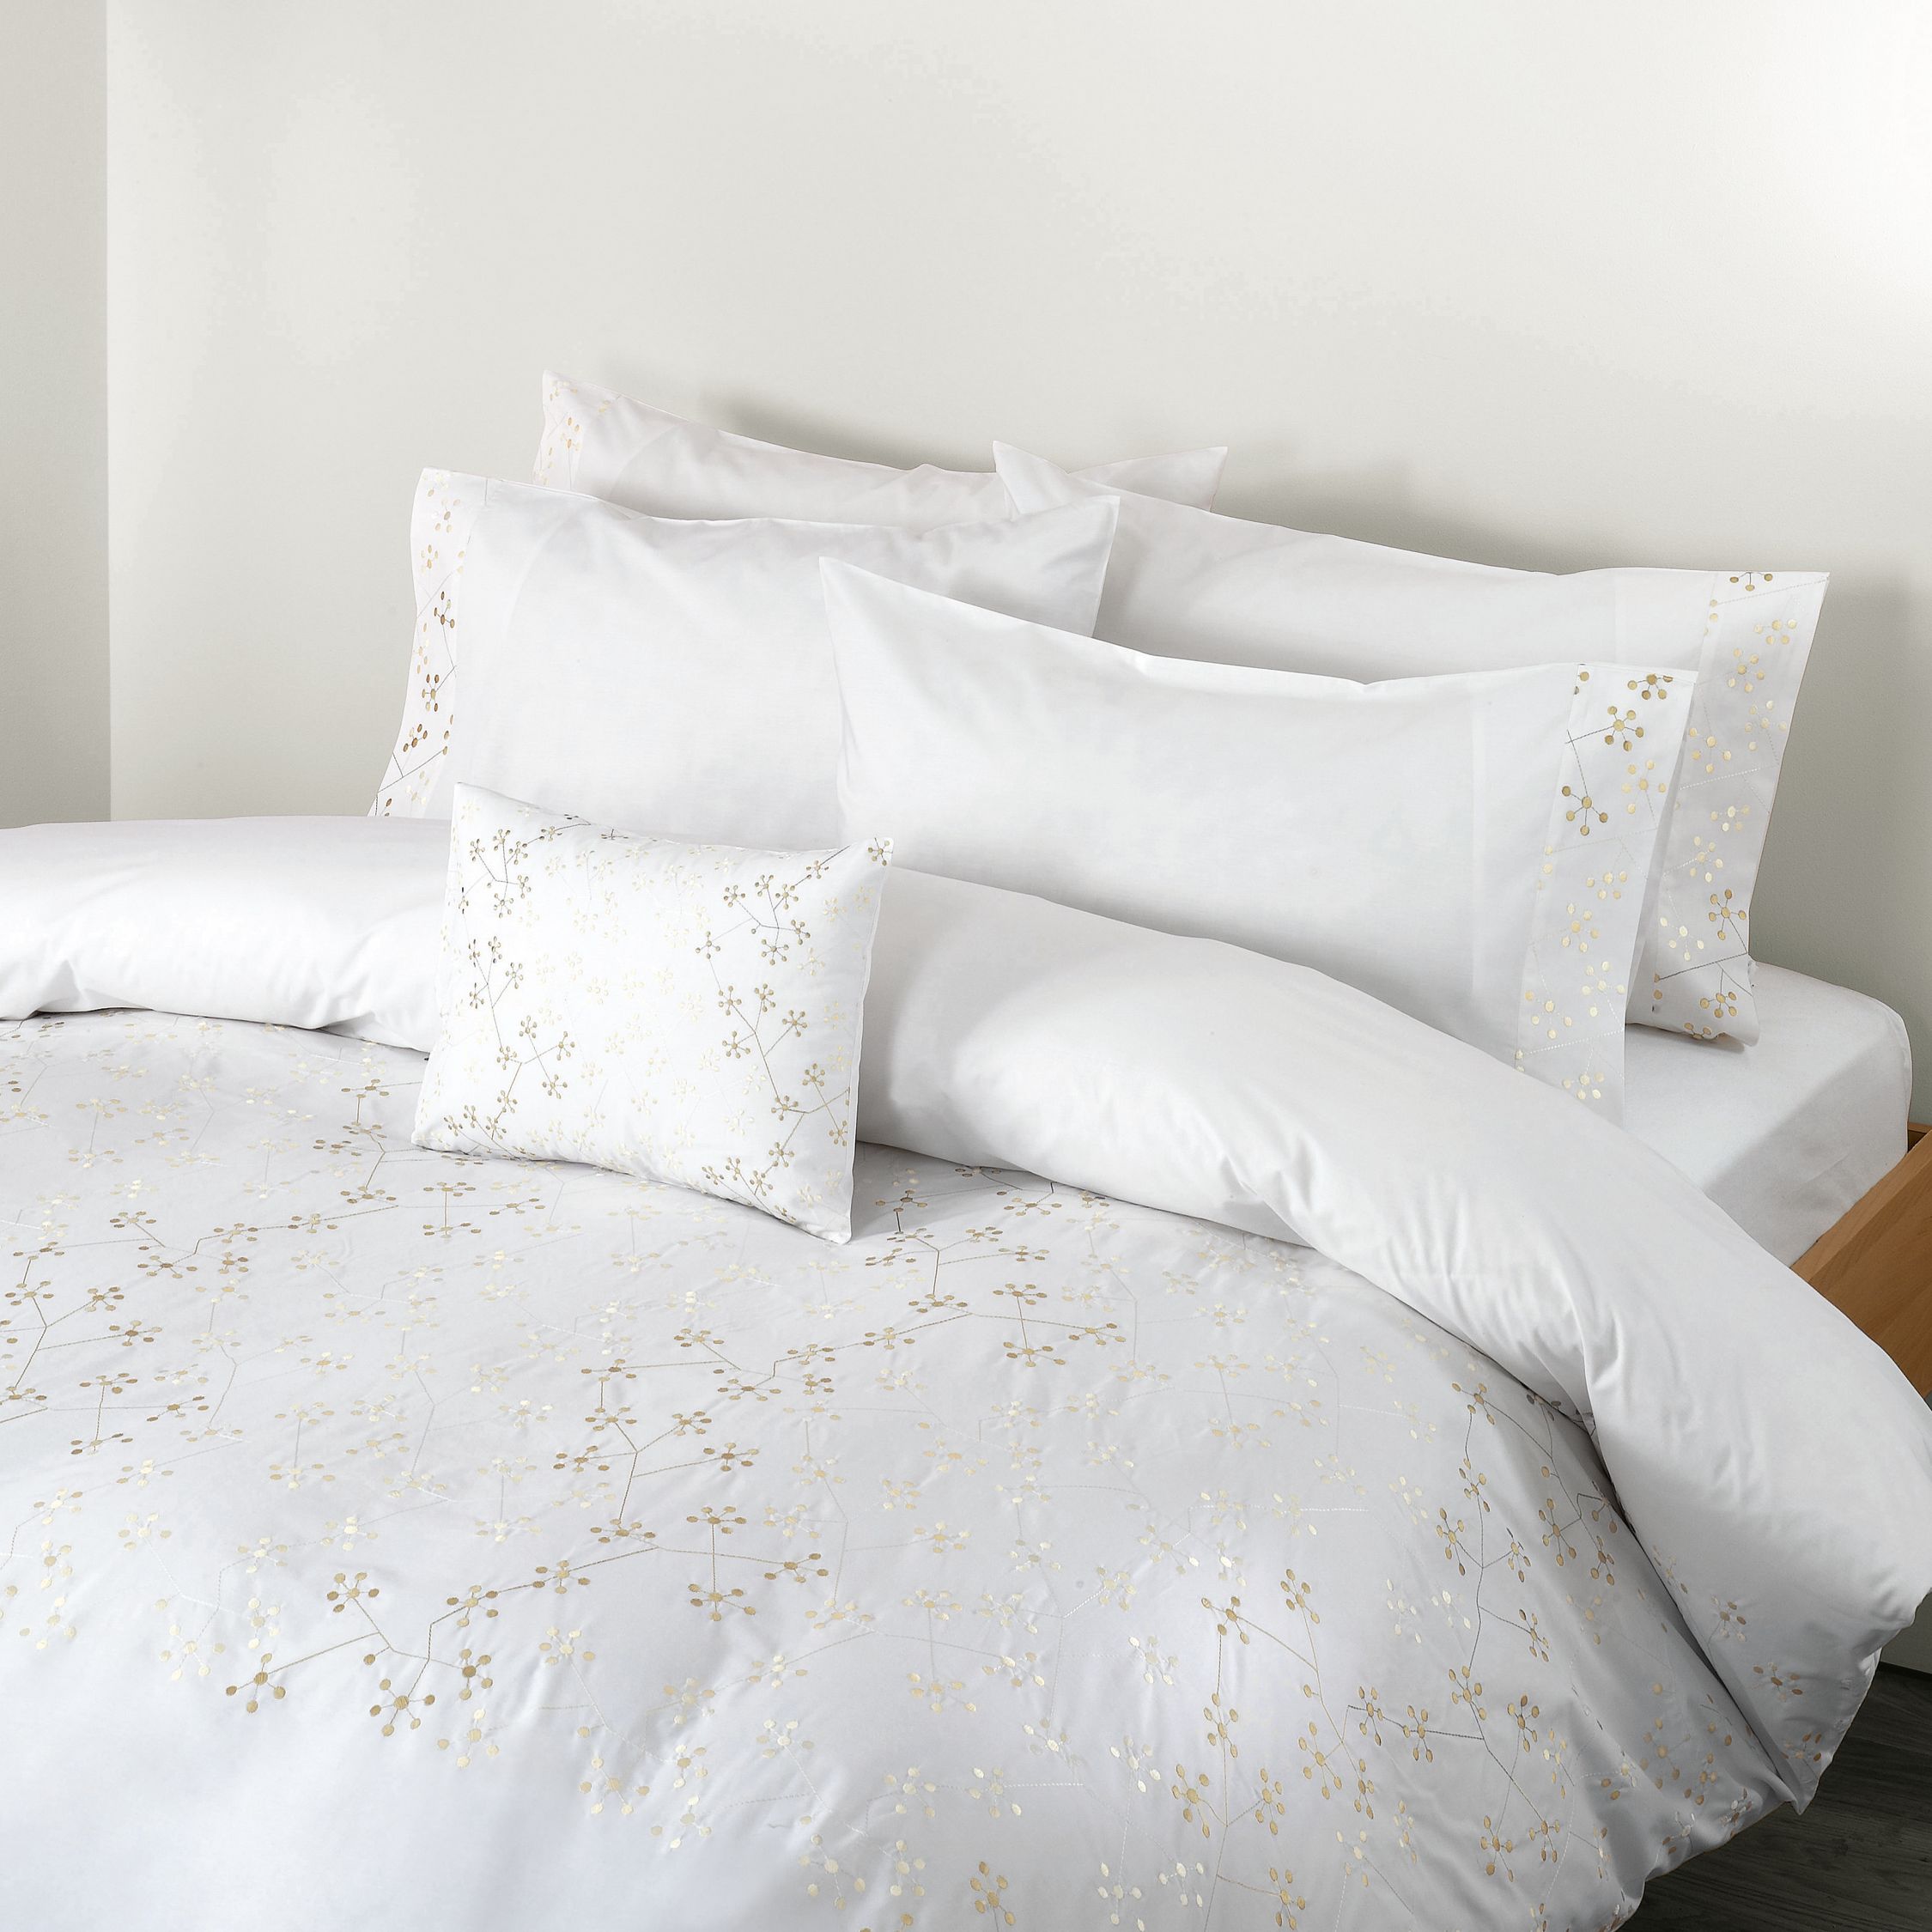 Embroidered Dots Duvet Covers, White